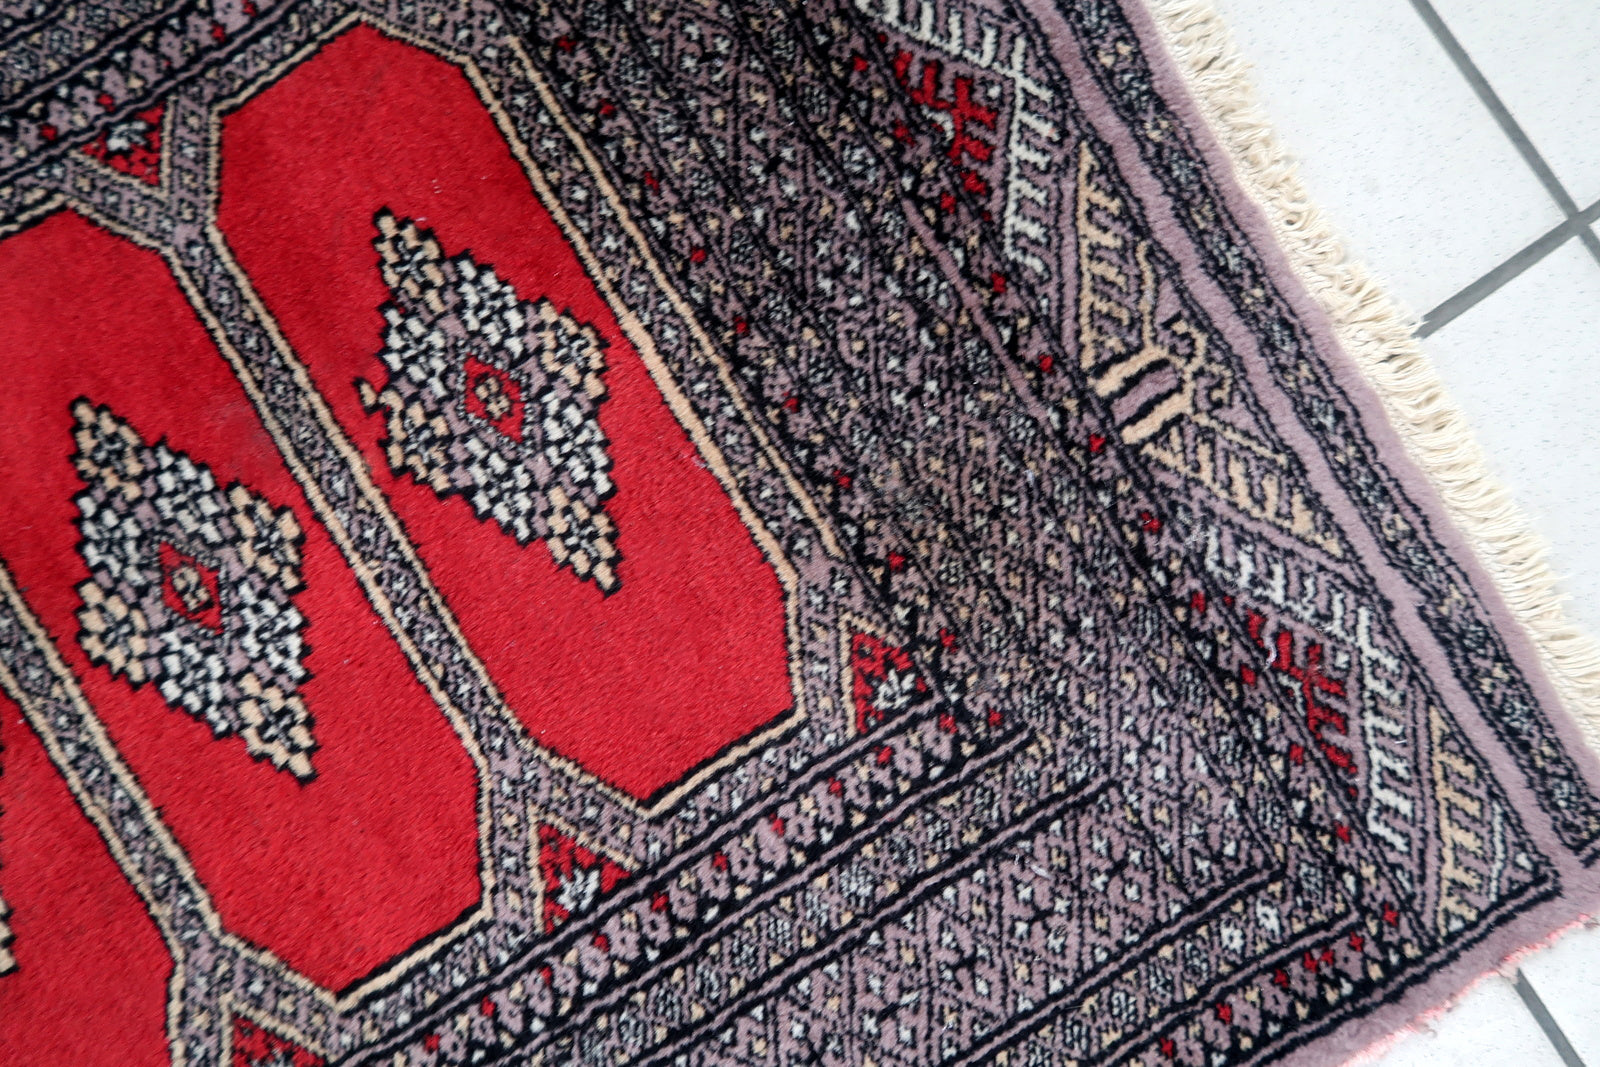 Handmade vintage Uzbek Bukhara rug in traditional design. The rug is from the end of 20th century in original good condition